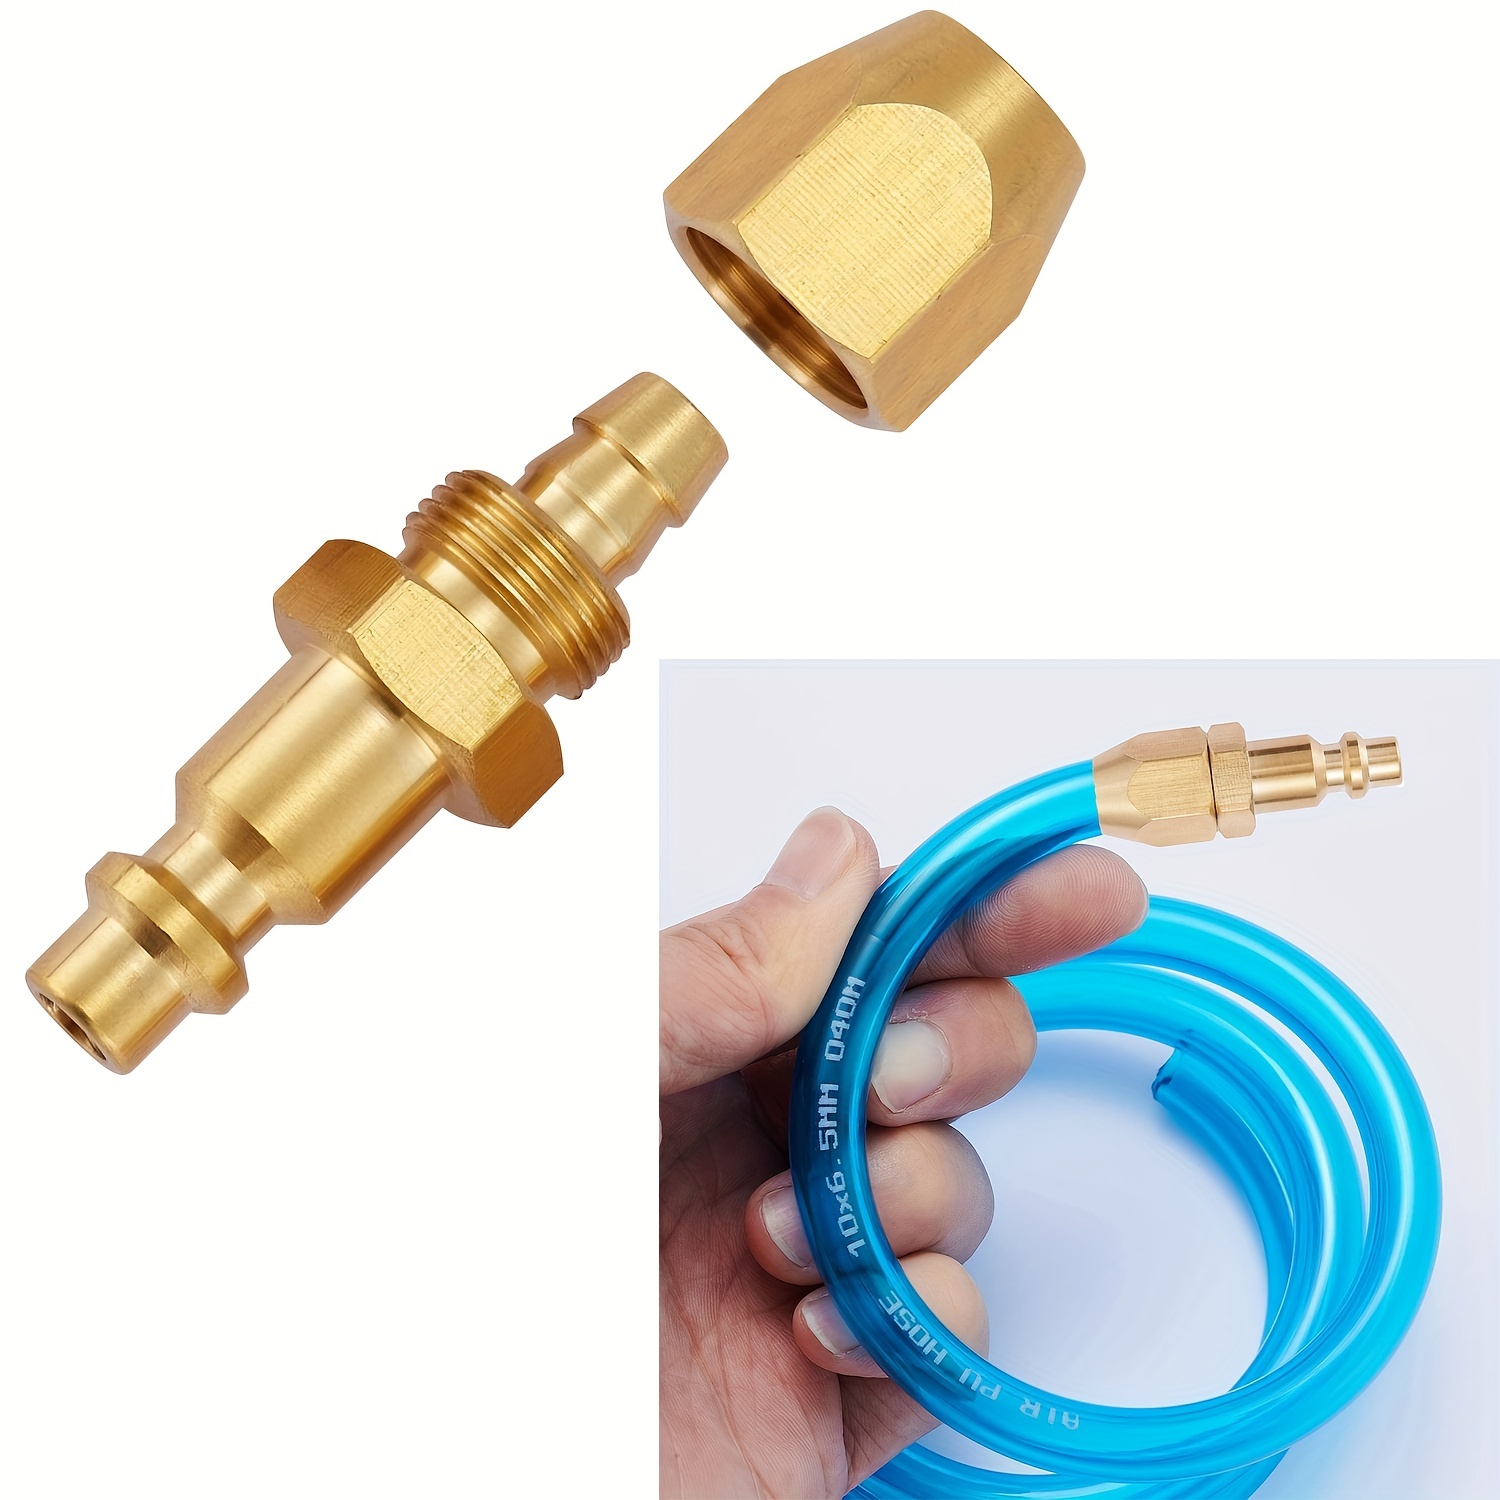 1pc Premium Solid Brass Pneumatics Reusable Hose-End Repair Fitting, 1/4  Barb For 1/4-Inch ID Polyurethane Air Hose With 1/4 NPT Rigid Replacement